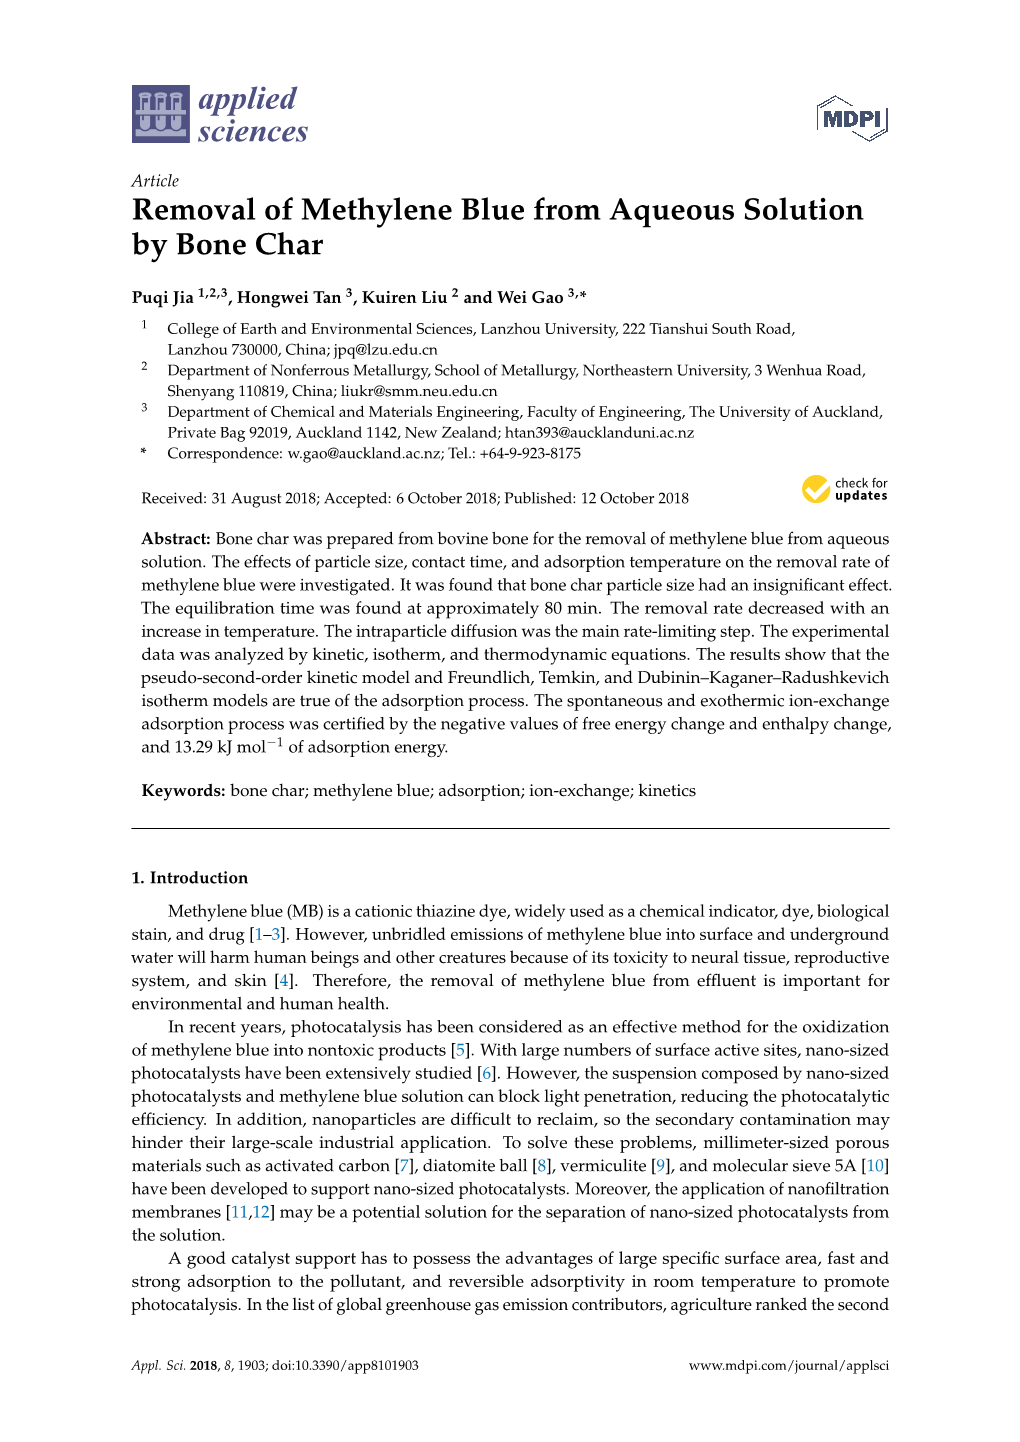 Removal of Methylene Blue from Aqueous Solution by Bone Char